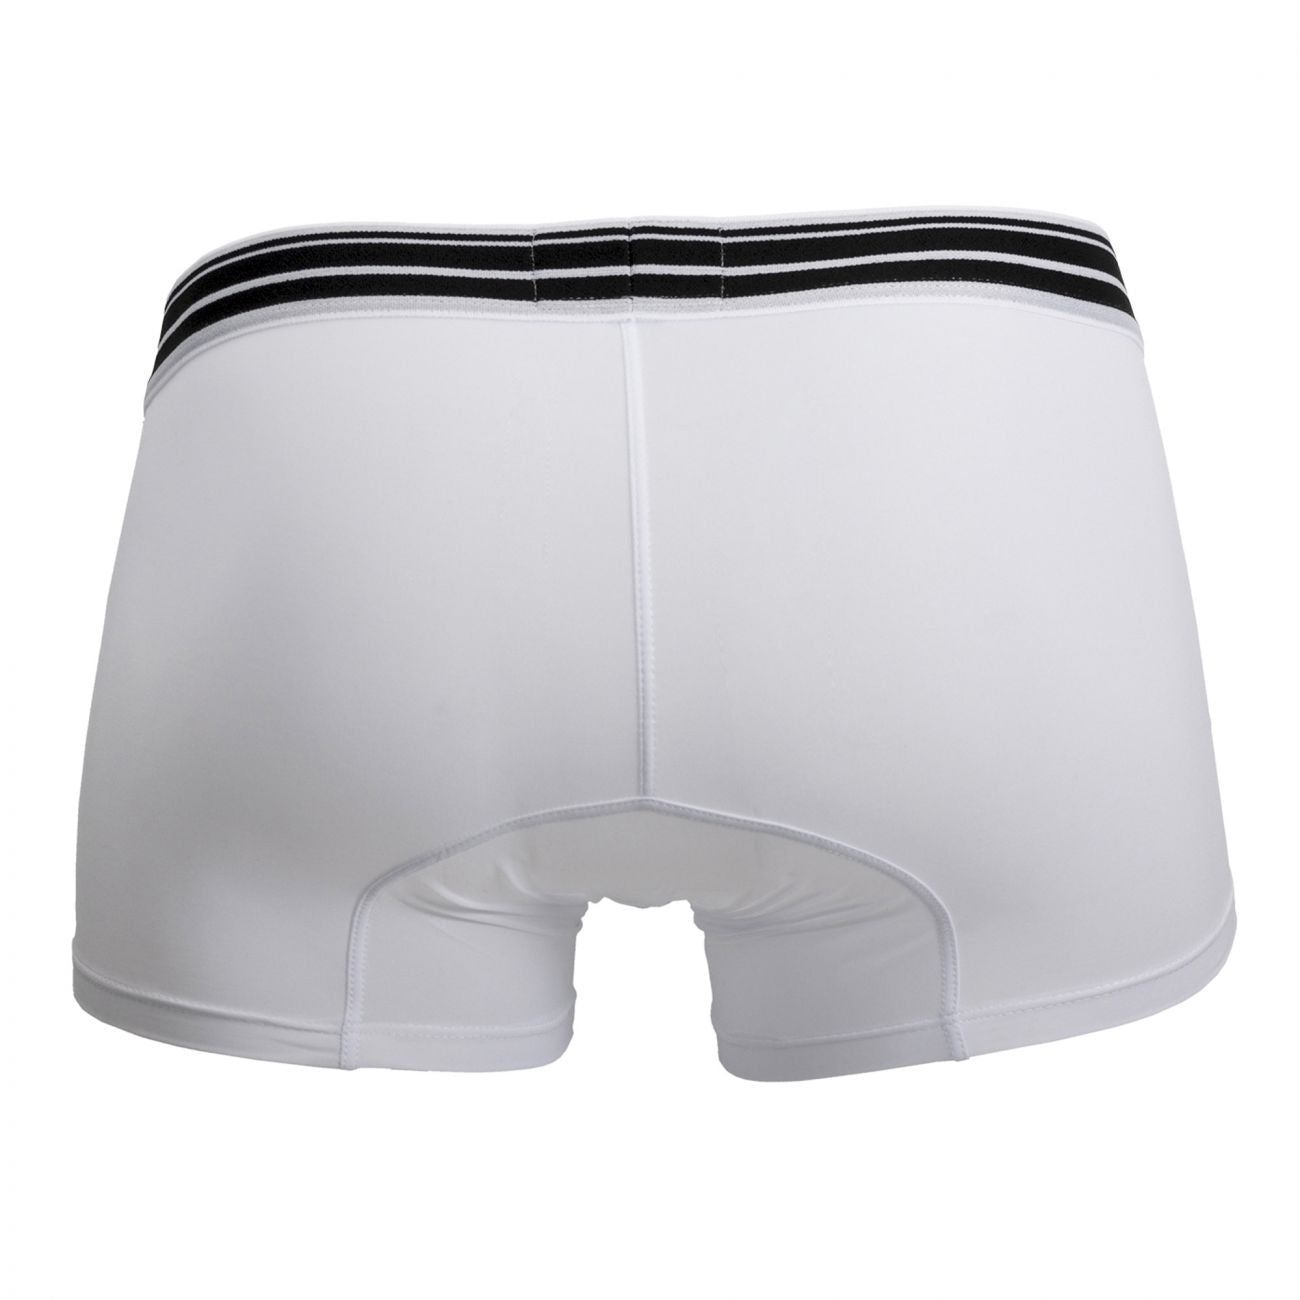 Clever 2387 Sophisticated Boxer Briefs White